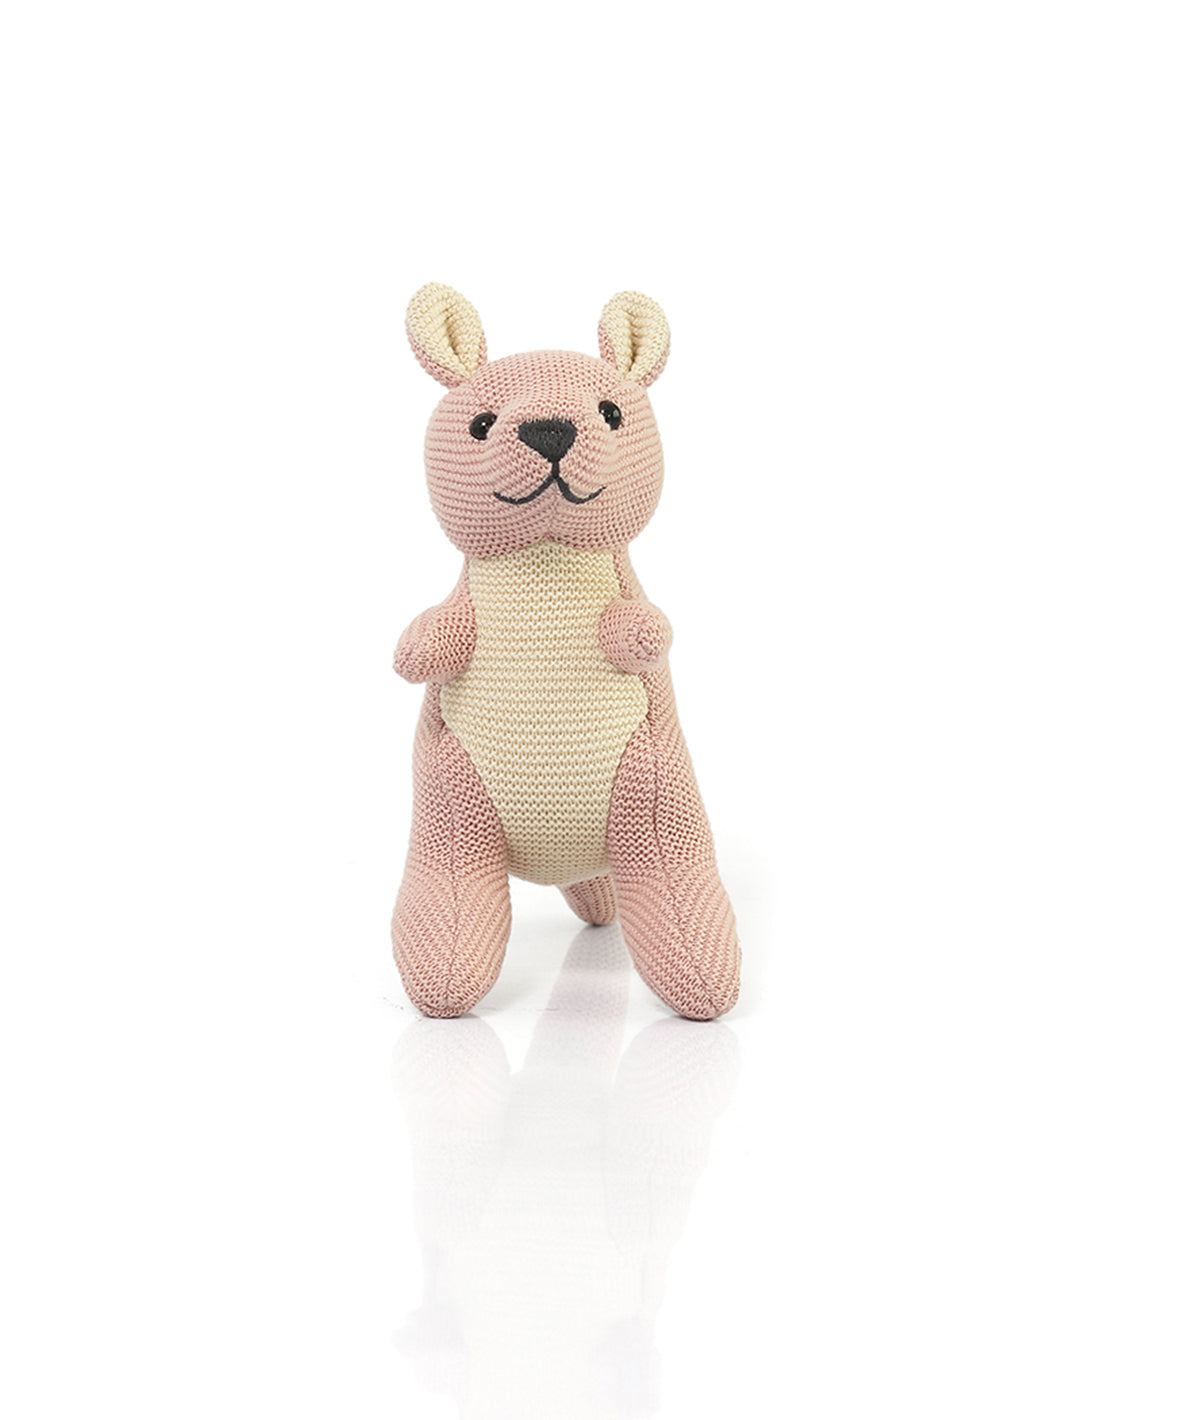 Doodle Kangaroo Rattle Cotton Knitted Stuffed Soft Toy (Pale Pink & Natural)